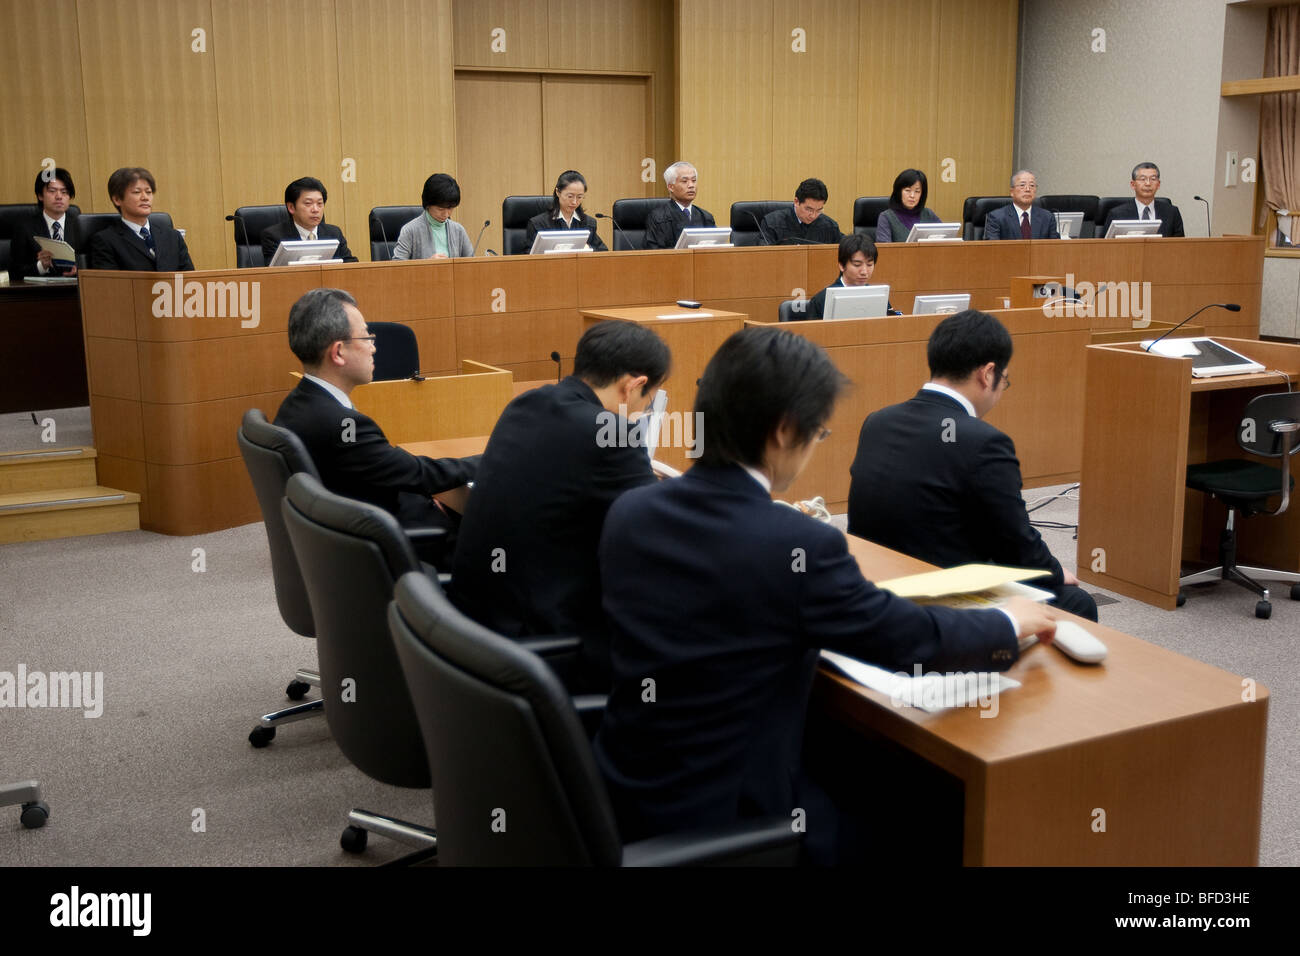 a 'mock' jury/court case being acted out in a Japanese law court. Stock Photo